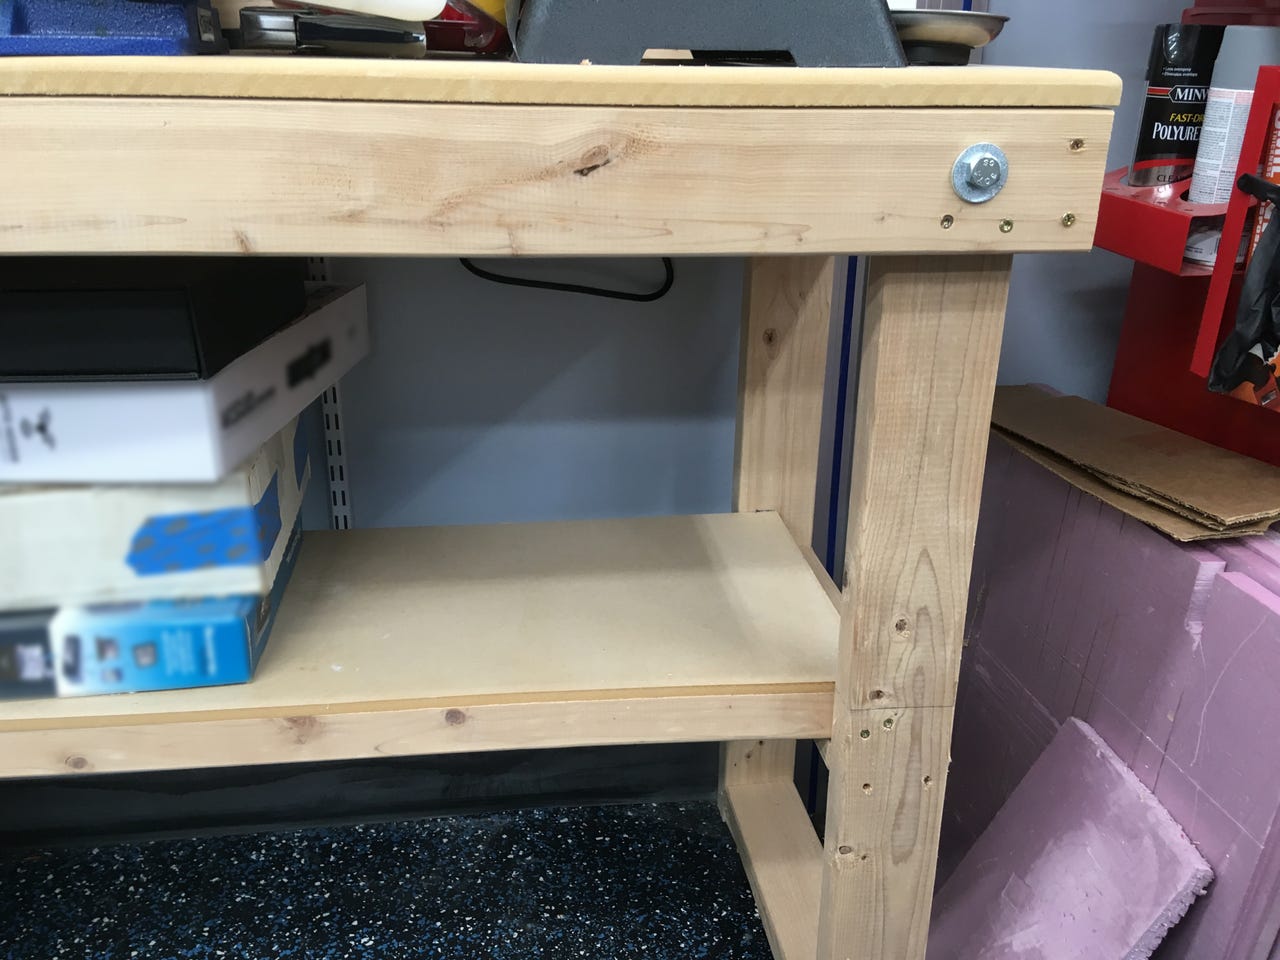 My first big CNC project: An organizer rack for parts